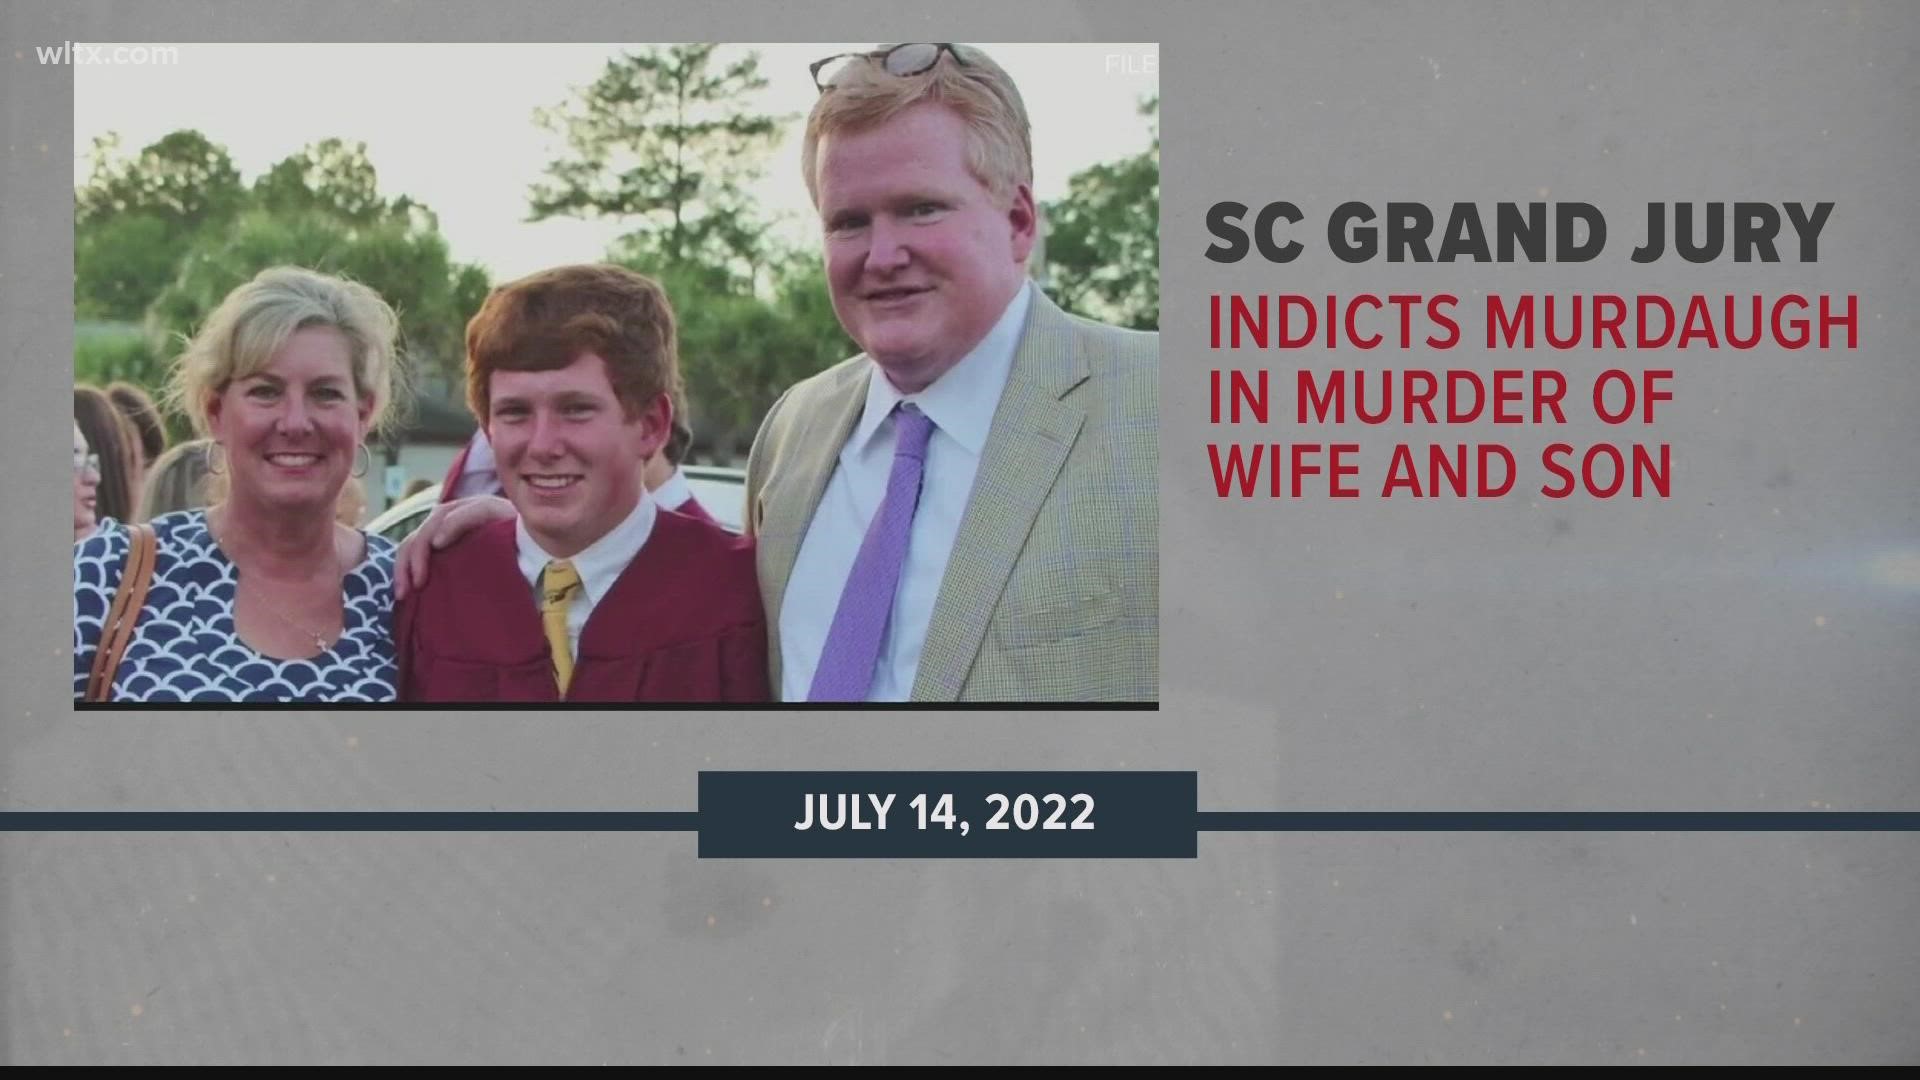 The former attorney is accused of shooting and killing his wife and son at their families home in Colleton county.